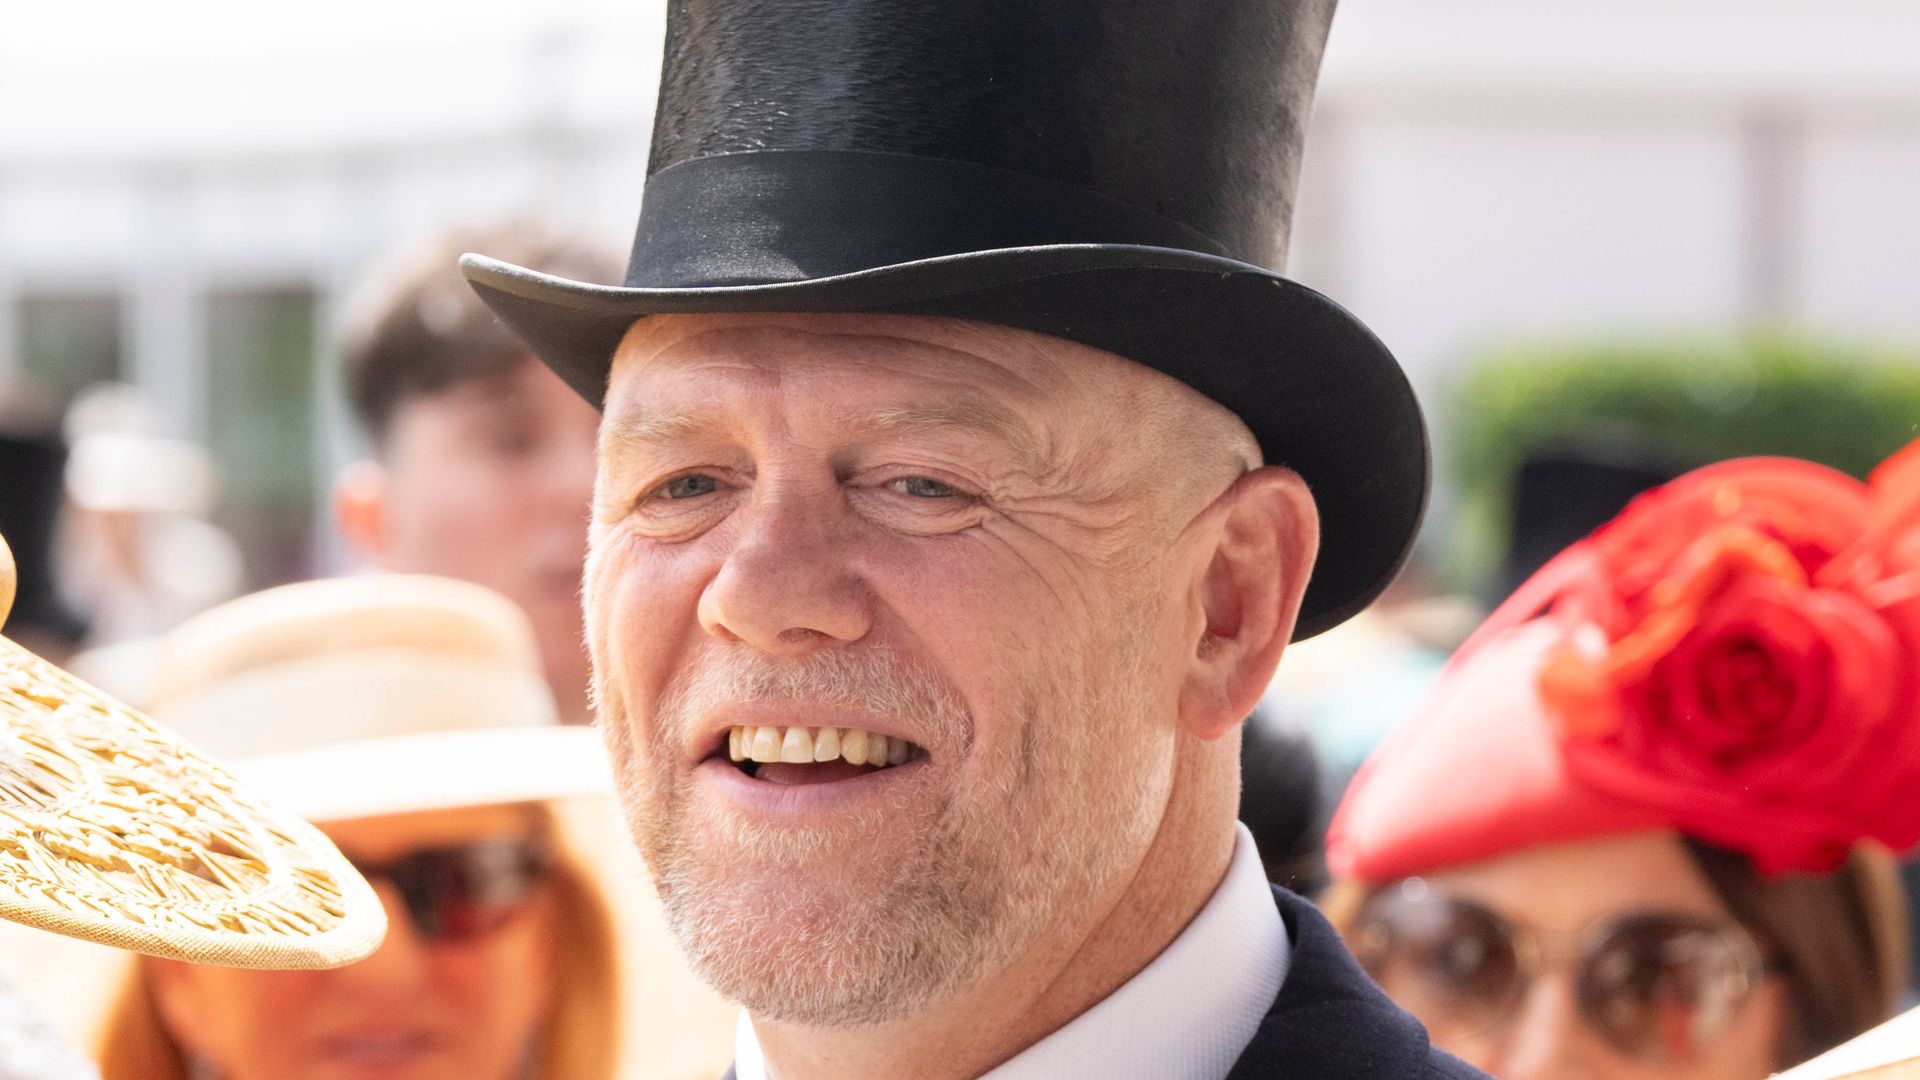 mike tindall in morning suit at ascot